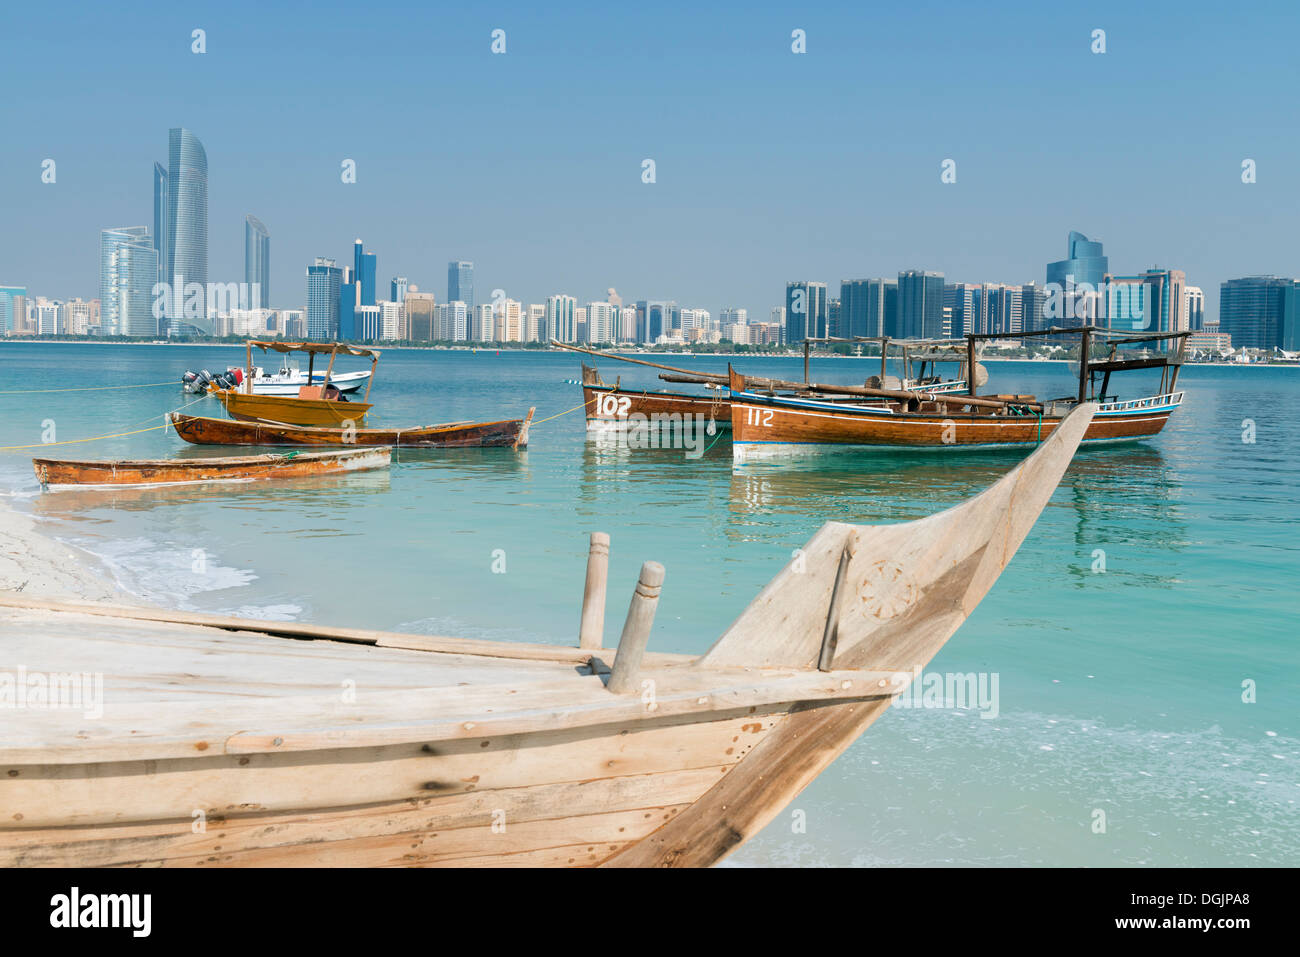 Skyline of modern Abu Dhabi and old traditional fishing boats in Heritage Village in Abu Dhabi in United Arab Emirates UAE Stock Photo